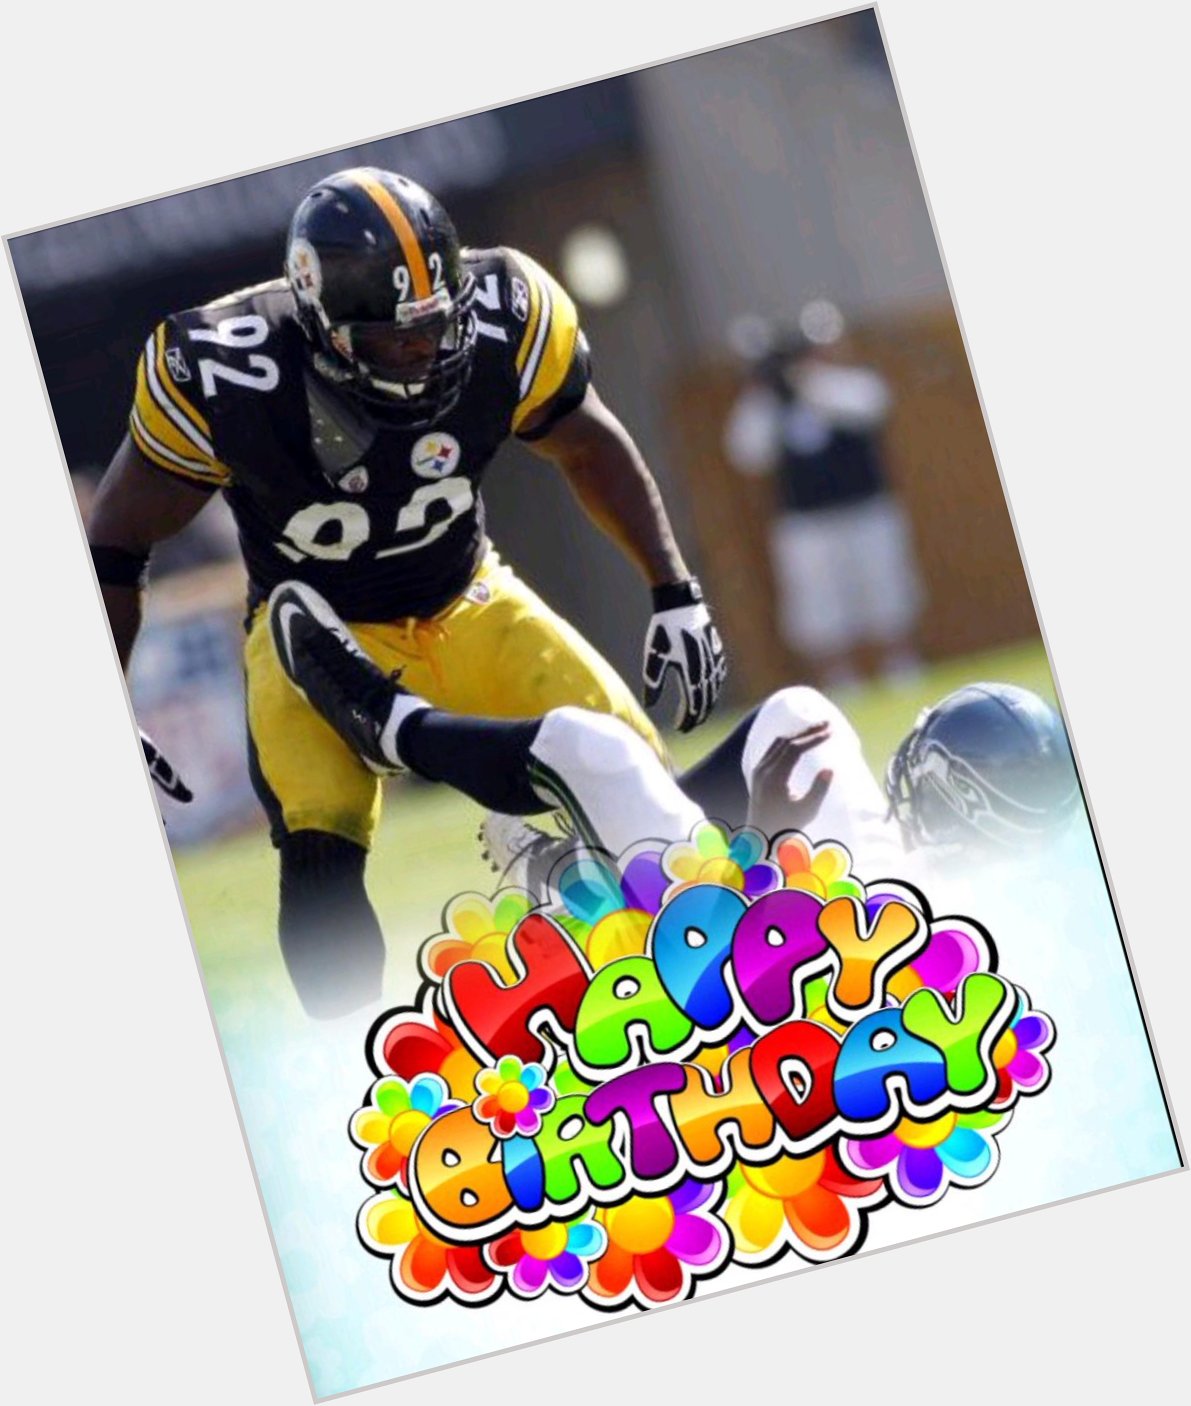 Happy Birthday to James Harrison! Harrison went to 5 Pro Bowls, has been an All-Pro twice and has 2 super bowl rings! 